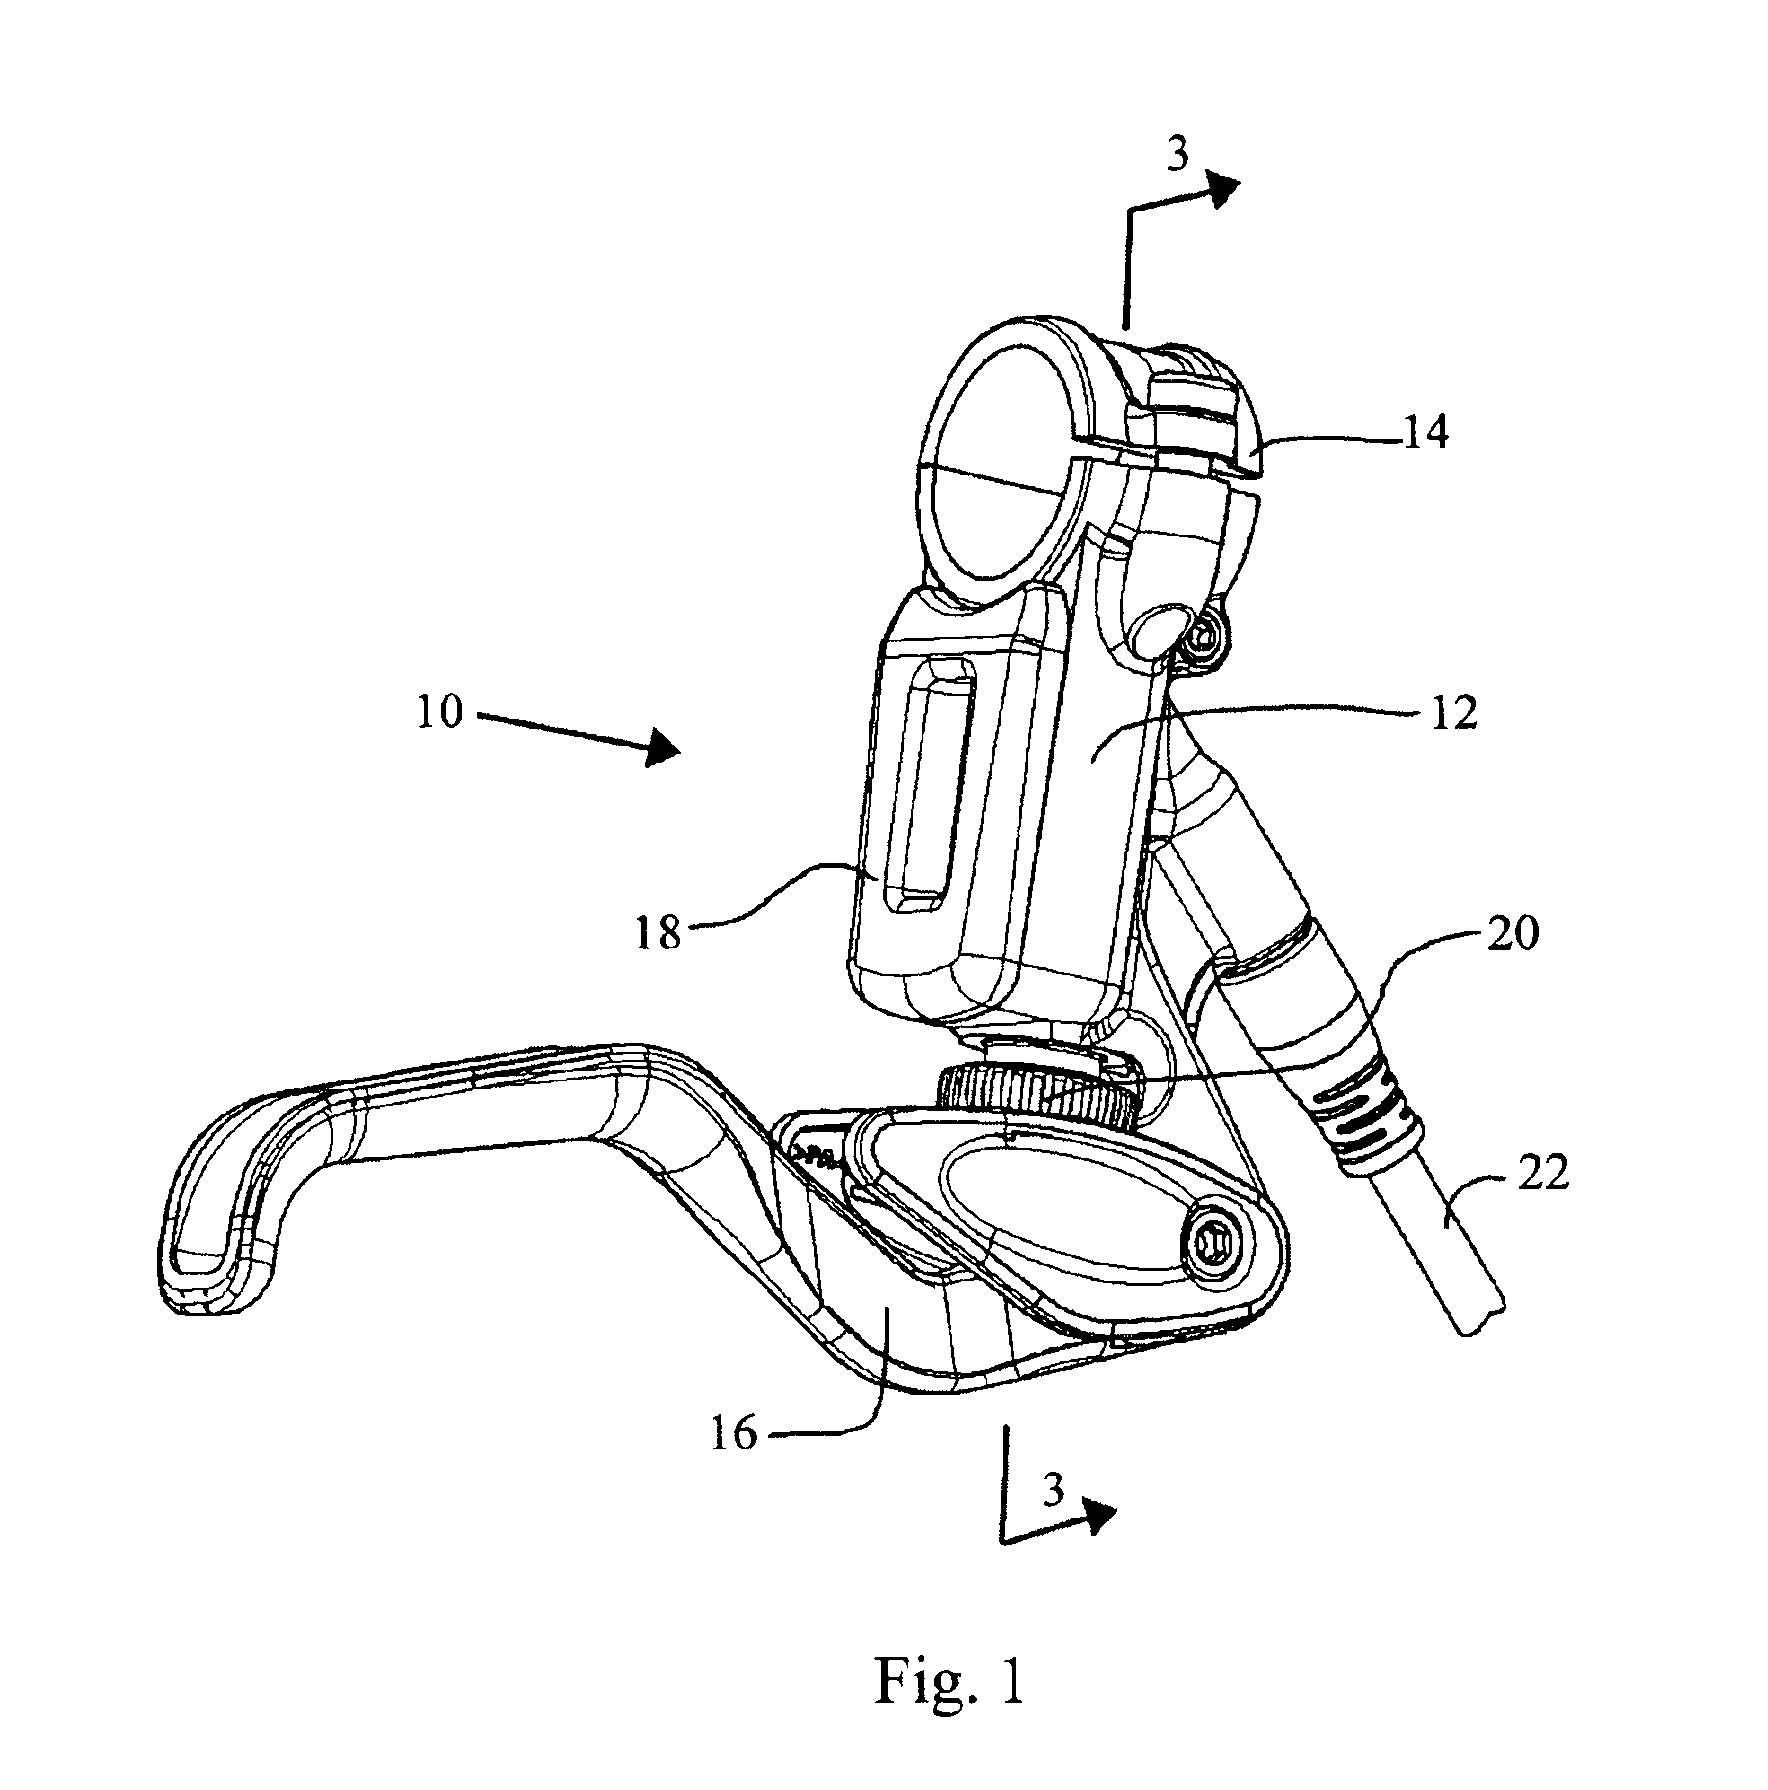 Reach adjustment mechanism for a master cylinder lever of a hydraulic disc brake